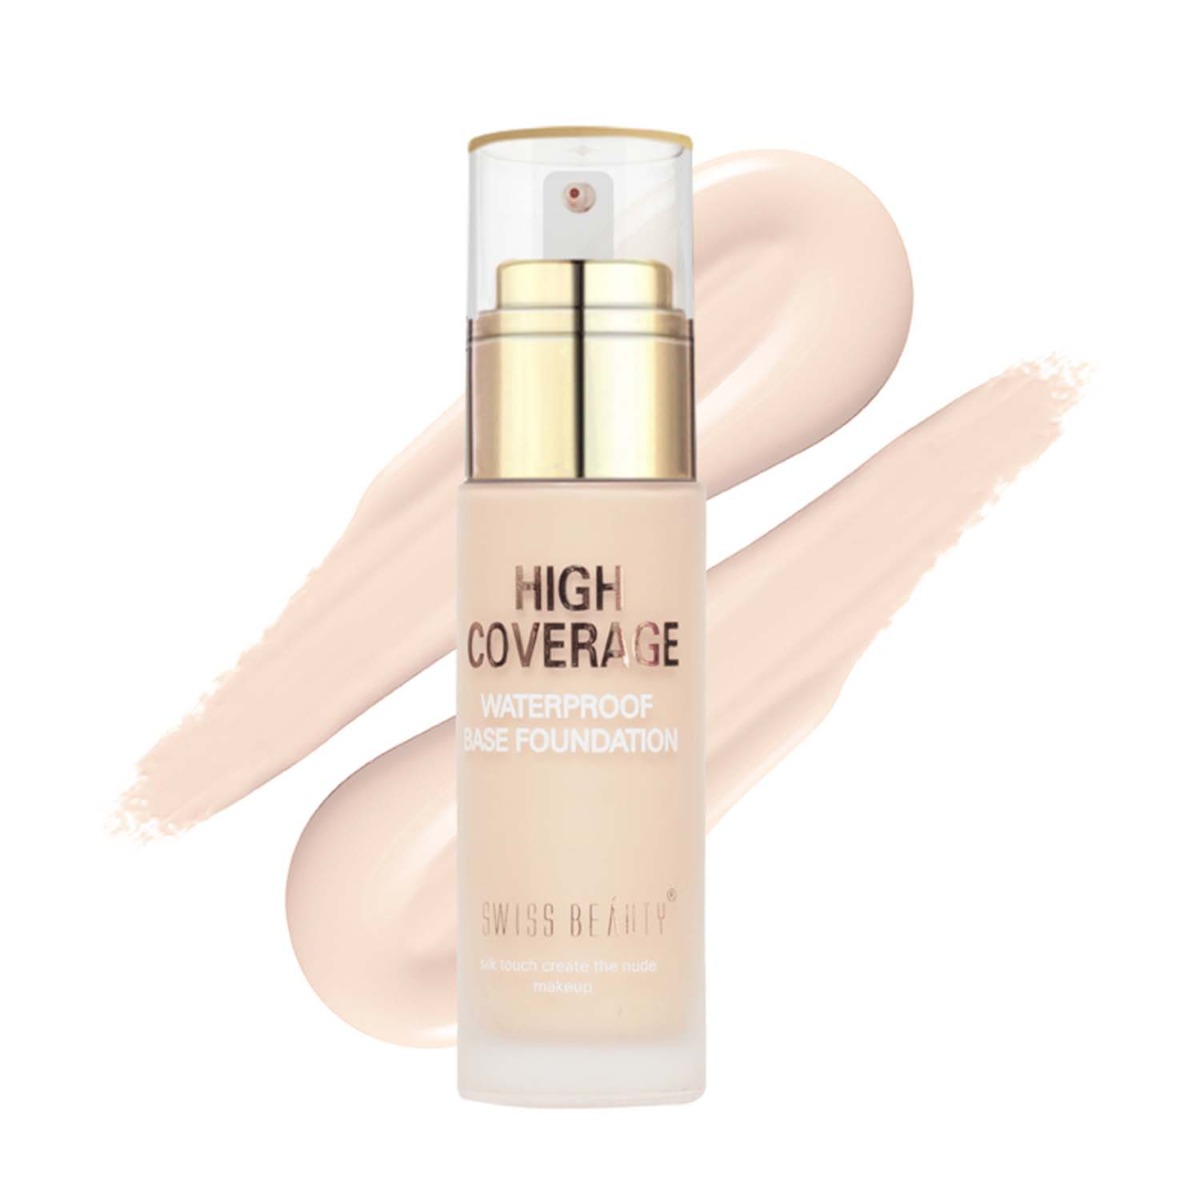 Swiss Beauty High Coverage Waterproof Base Foundation - Natural Beige, 60gm